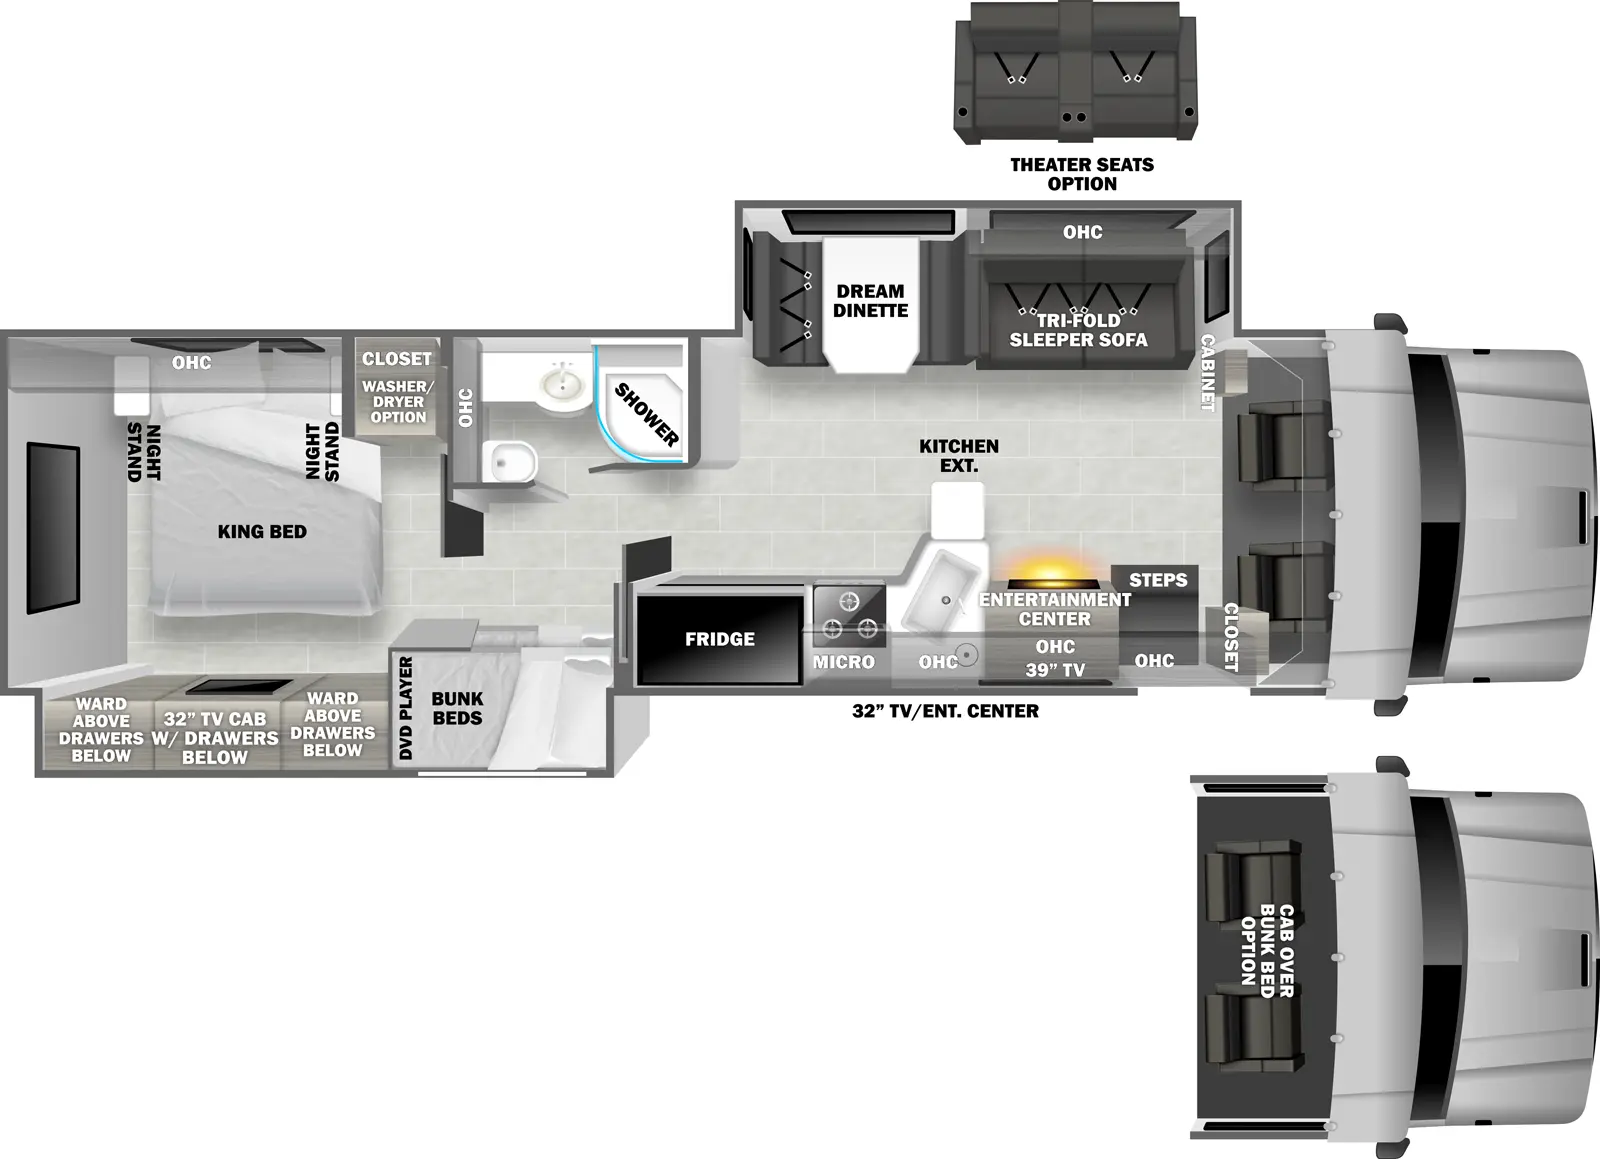 The 3700BD has two slideouts and one entry. Exterior features a TV/entertainment center. Interior layout front to back: cockpit (optional cab over bunk bed); off-door side cabinet, and slideout with tri-fold sleeper sofa (optional theater seating) with overhead cabinets, and dream dinette; door side closet, entry, entertainment center with TV, overhead cabinet, kitchen counter with extension, sink, microwave, cooktop, and refrigerator; off-door side full bathroom with overhead cabinet; door side slideout with bunk beds with DVD player, and bedroom wardrobe with TV and drawers below; rear bedroom with off-door side closet with washer/dryer option, and side-facing king bed with overhead cabinet and night stands on each side.